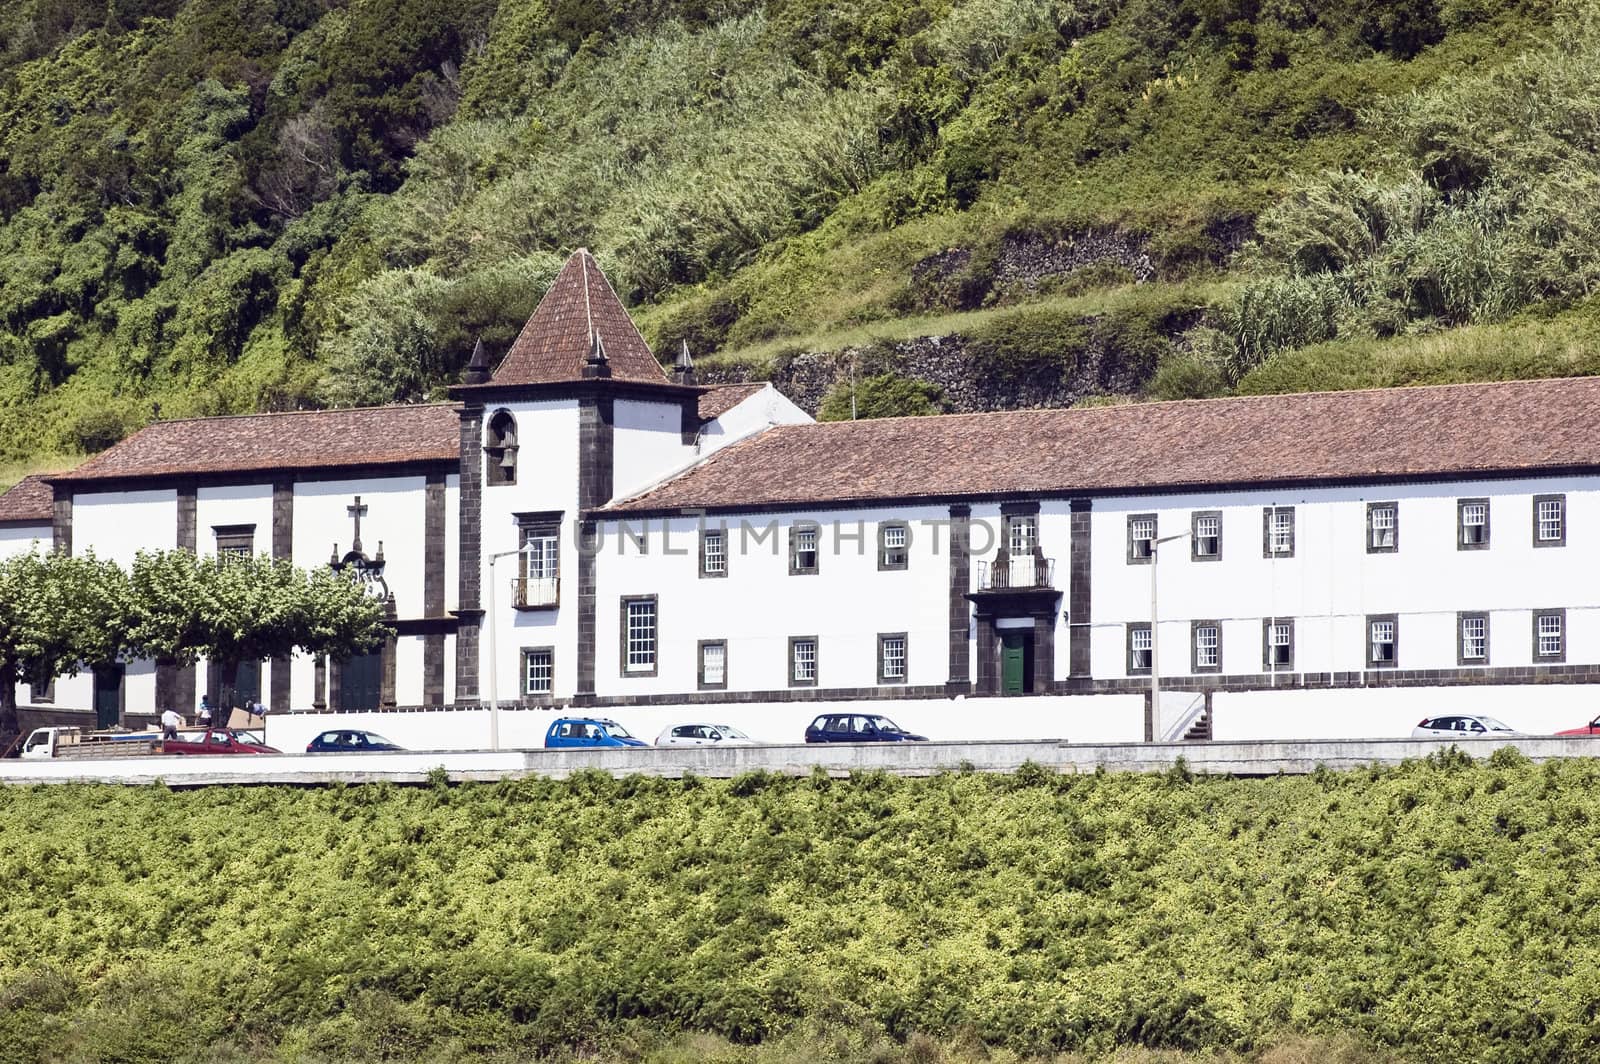 Monastery of St. Francis, now the City Hall of Lages do Pico, Pico island, Azores, Portugal
